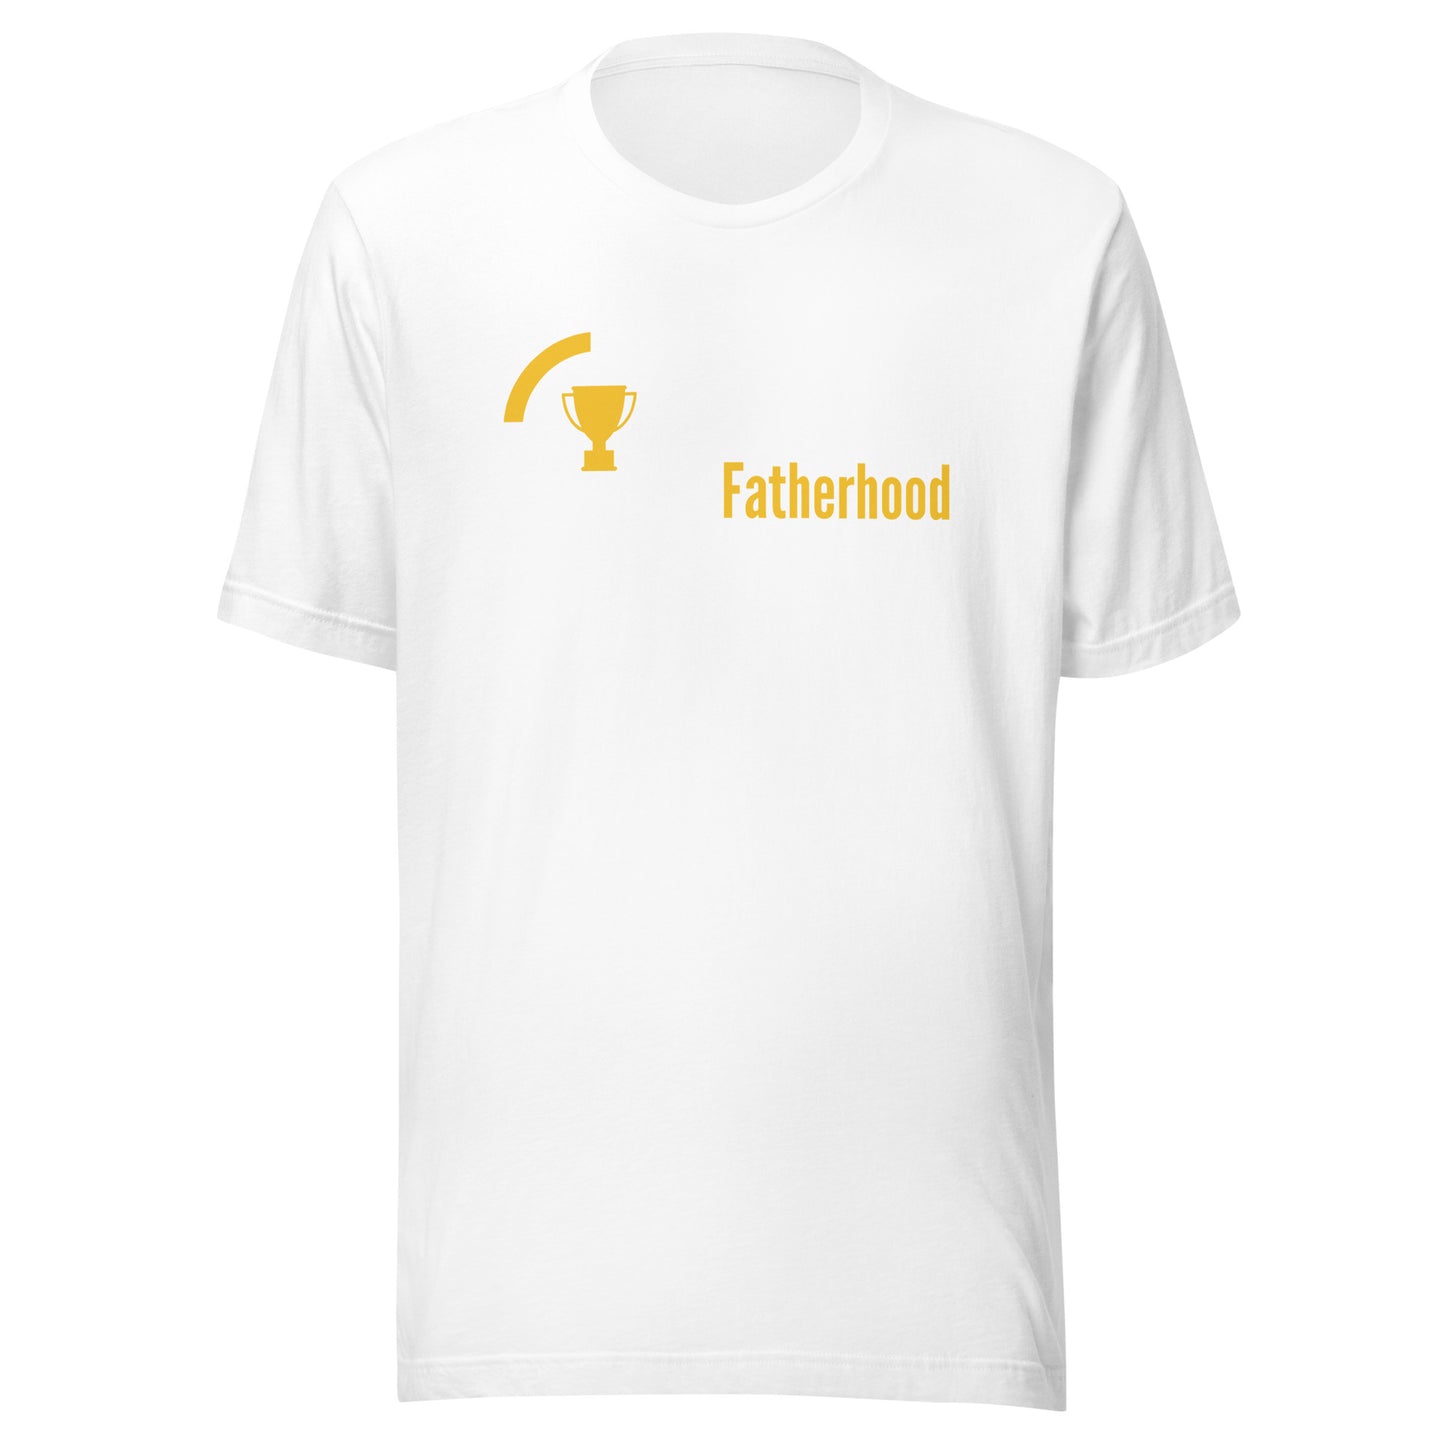 Achievement Unlocked Fatherhood | Gift for New Dad | Casual Tee